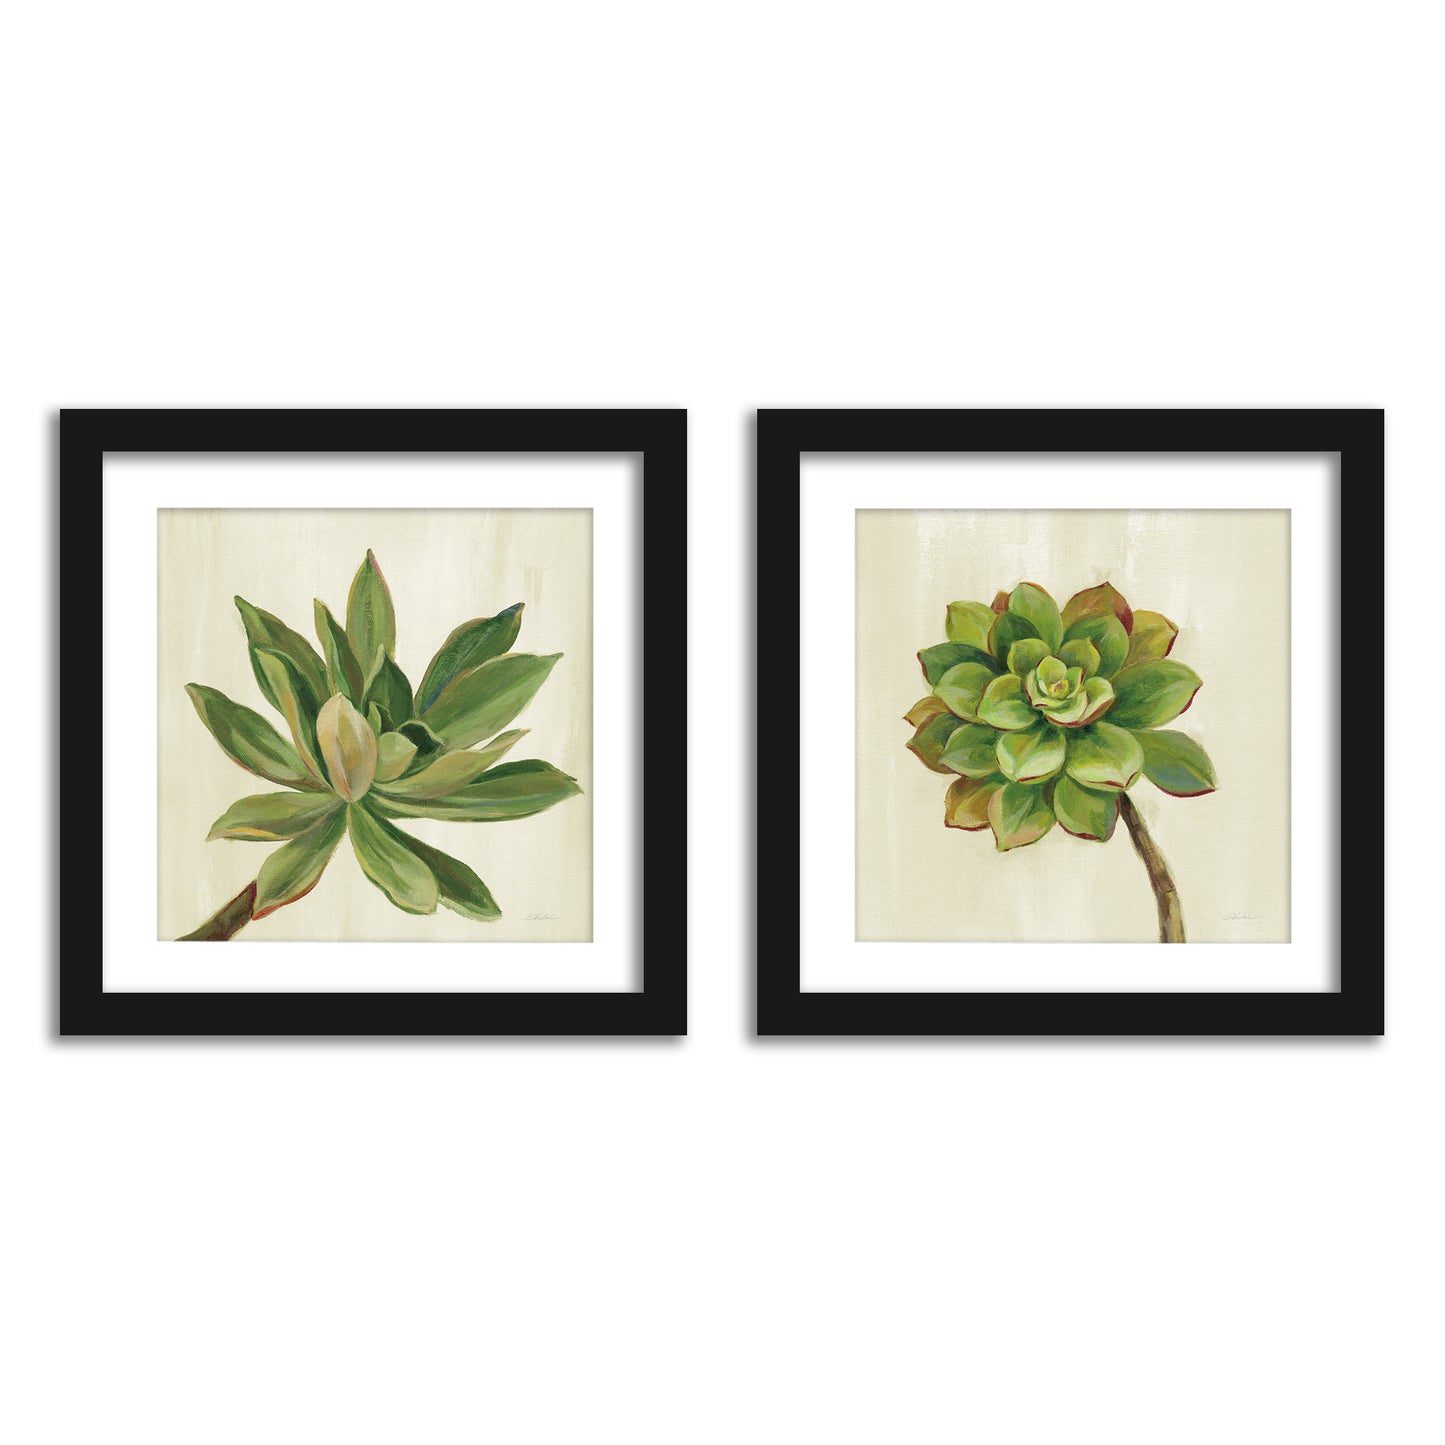  Watercolor Succulents Bathroom Wall Art - Set of 2 Framed Prints by Wild Apple